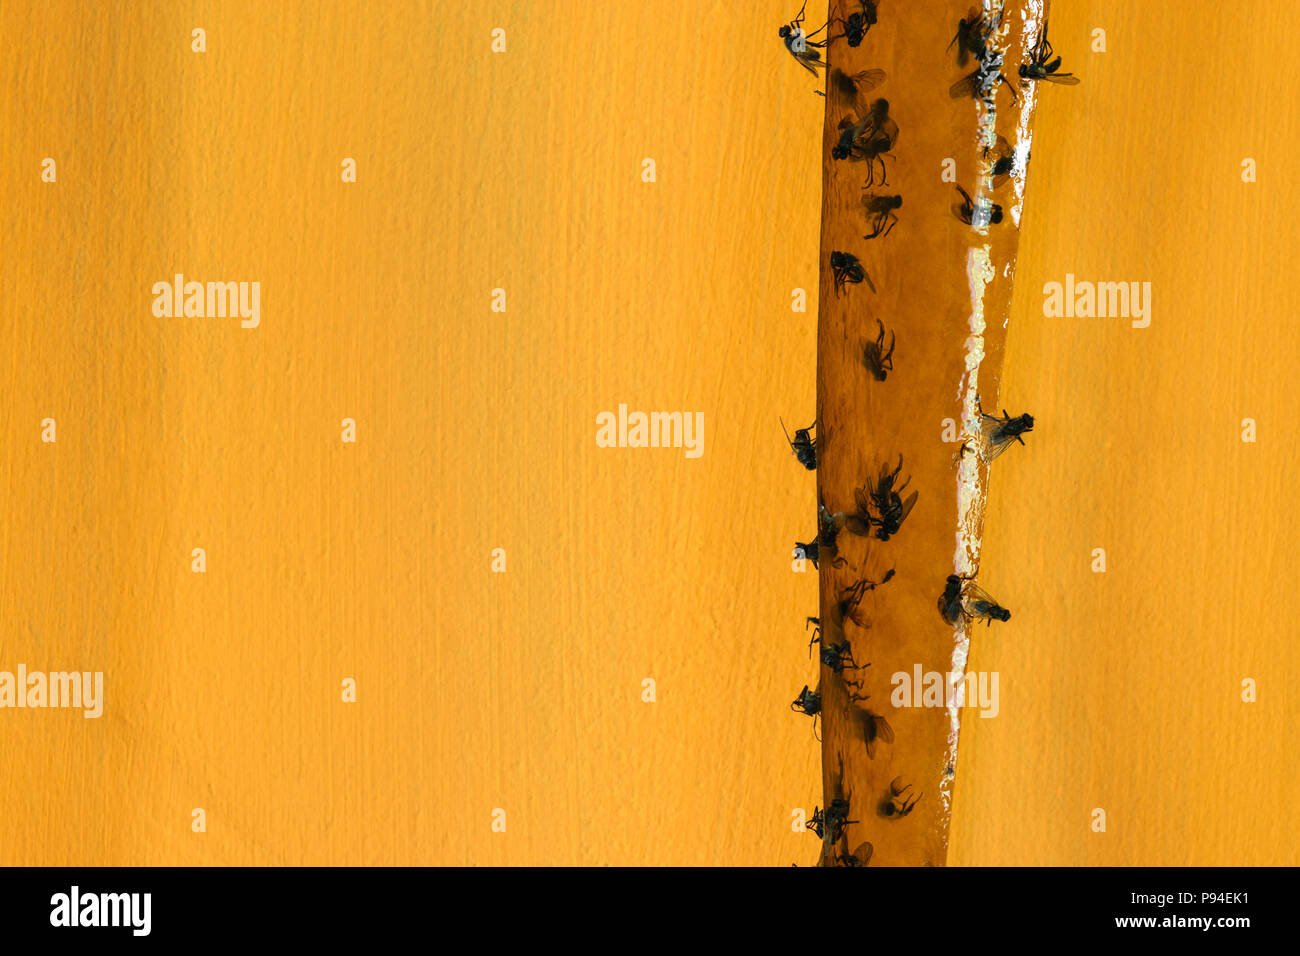 A lot of flies caught on sticky fly catcher in yellow background surface Stock Photo